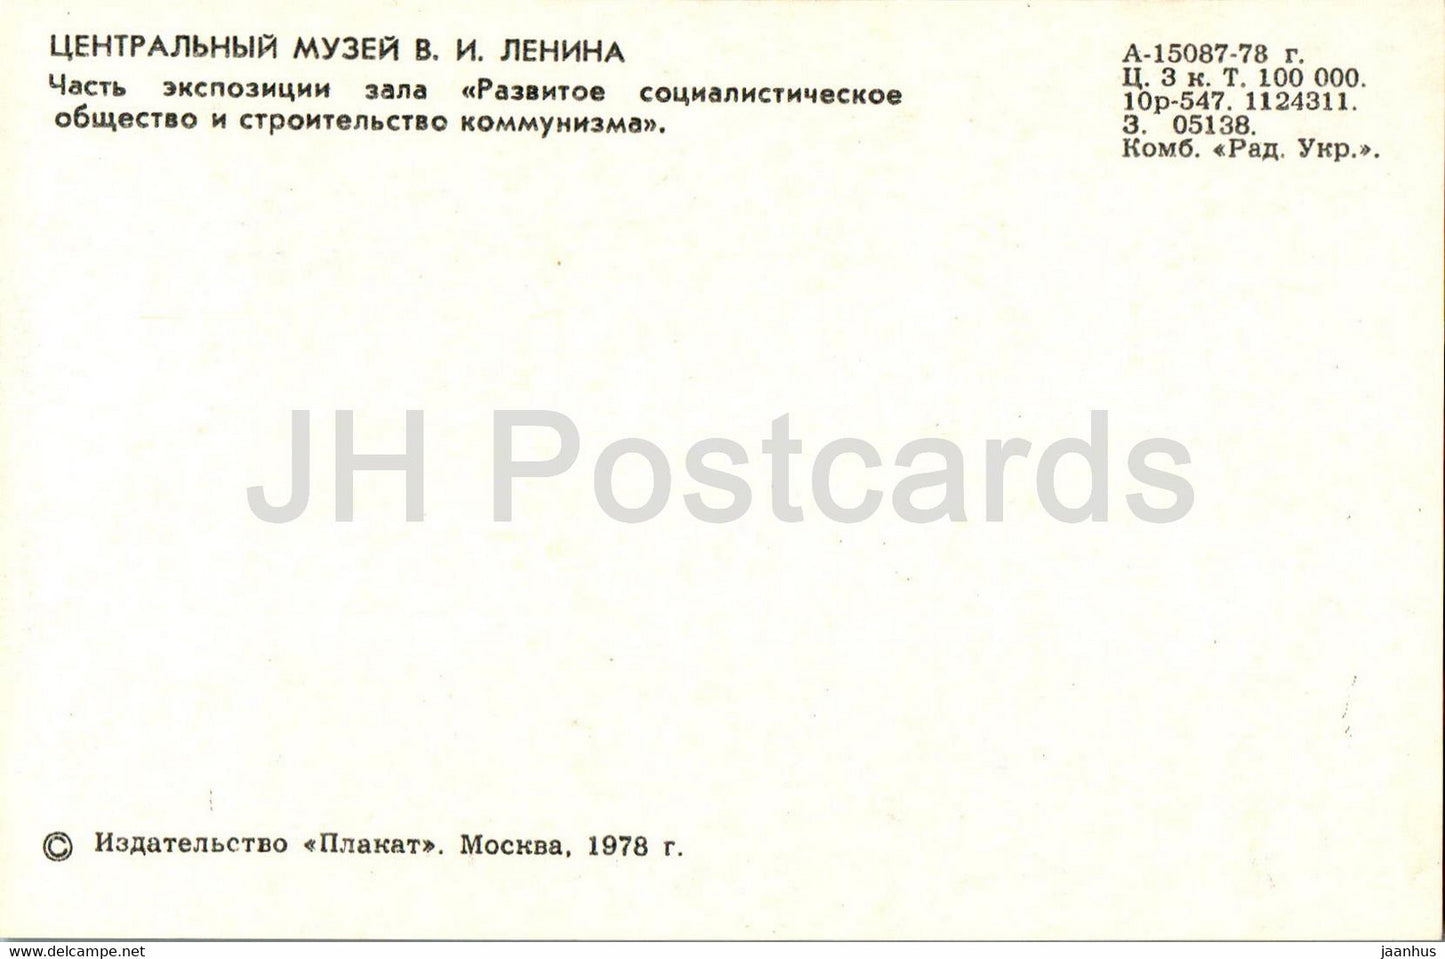 Moscow - Lenin Central Museum - part of the exposition of Socialist Community - 1978 - Russia USSR - unused